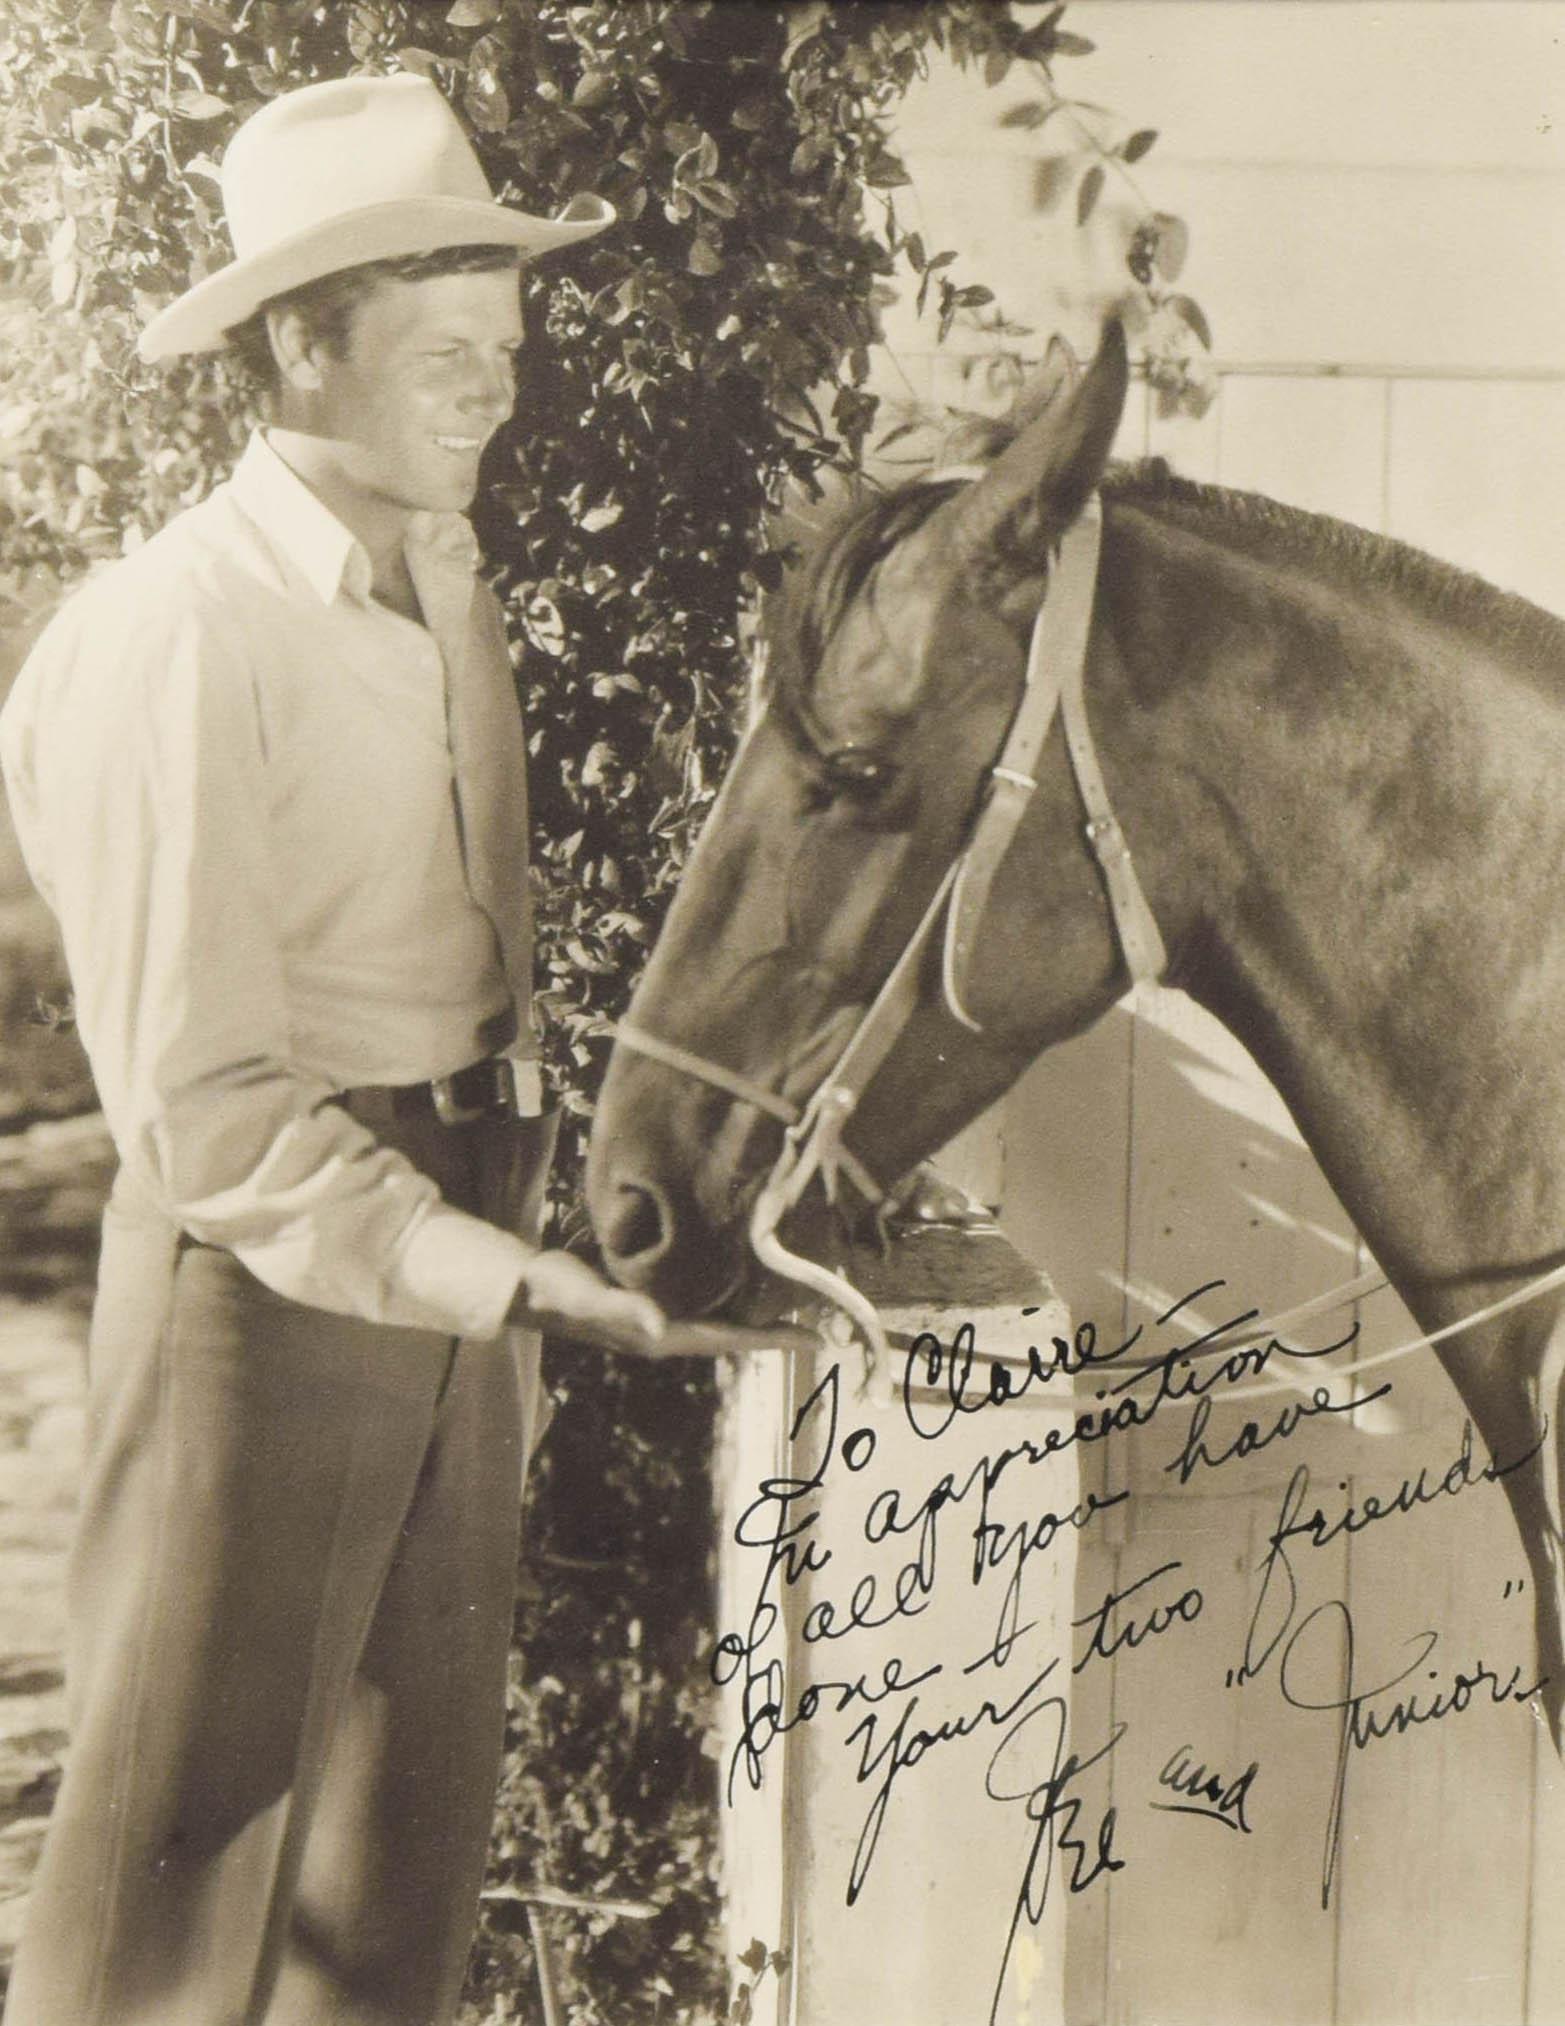 Framed and Signed Photograph of Jerry McCree and Junio In Good Condition For Sale In Coeur d'Alene, ID